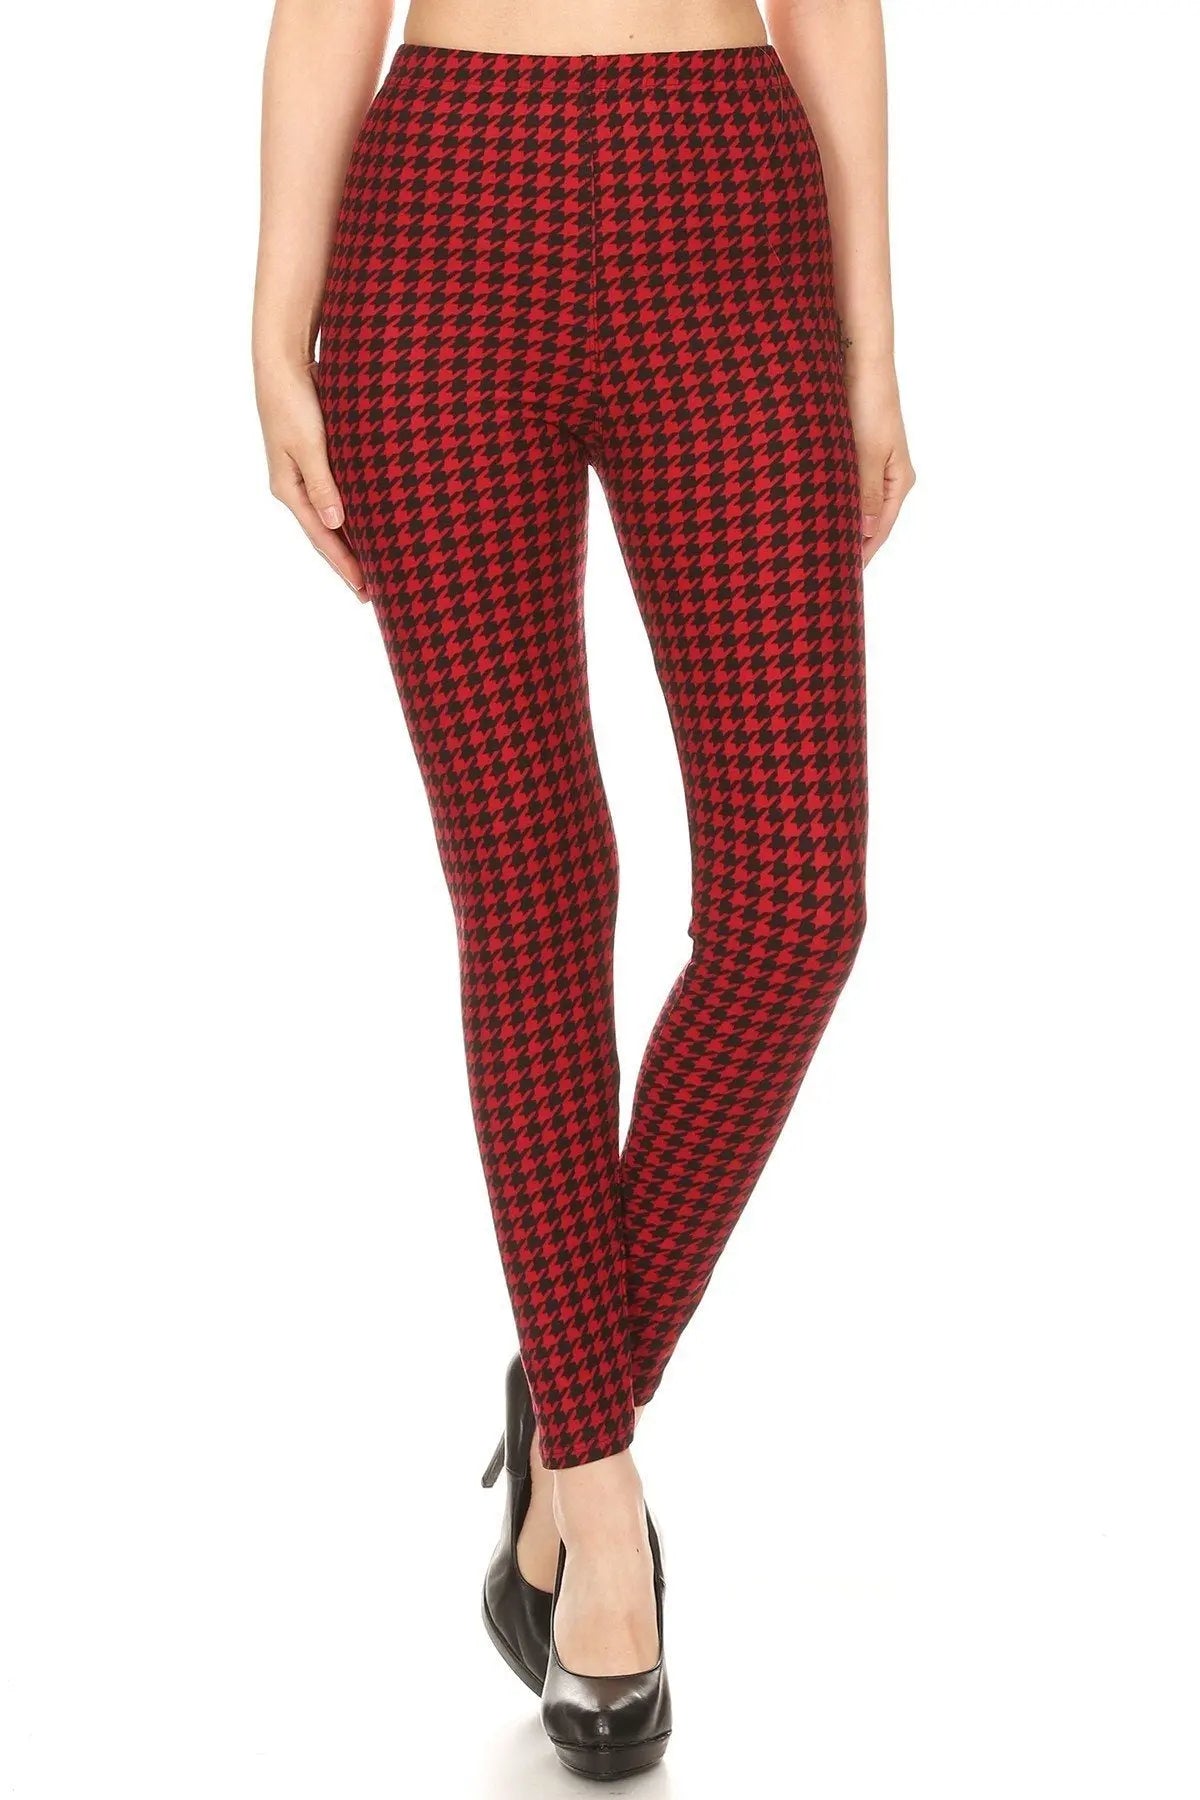 Hounds Tooth Print, High Rise, Fitted Leggings, With An Elastic Waistband Sunny EvE Fashion